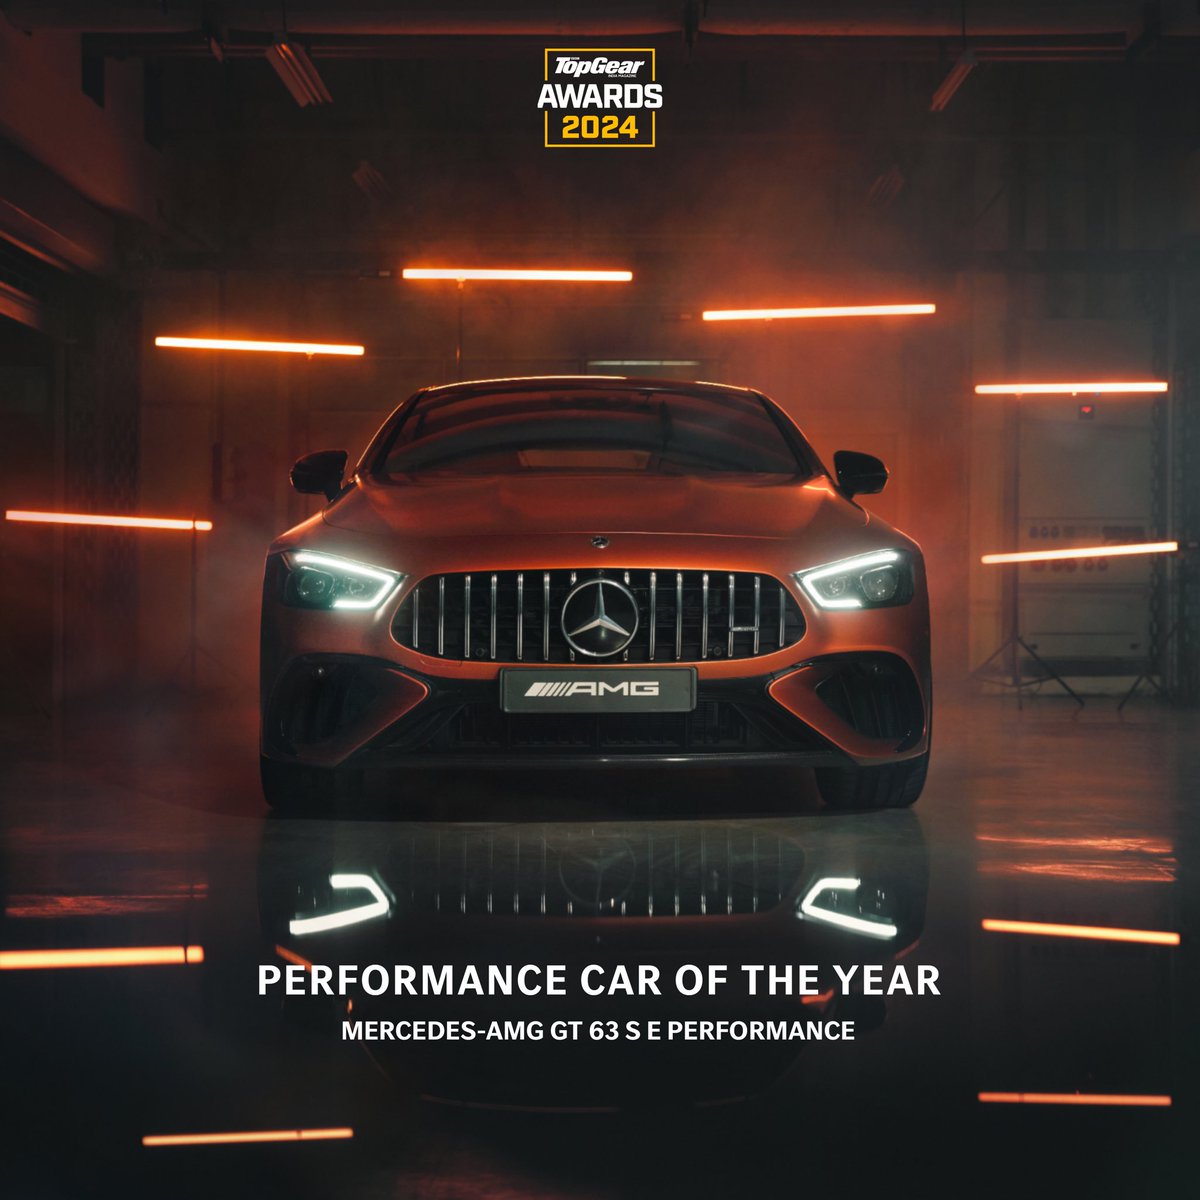 Drive to a new dimension of performance with the most powerful AMG yet. We are thrilled to announce the recent win of the Mercedes-AMG GT 63 S E Performance as 'Performance Car of the Year' at @TopGearMagIndia Awards 2024. #MercedesAMG #MercedesBenzIndia